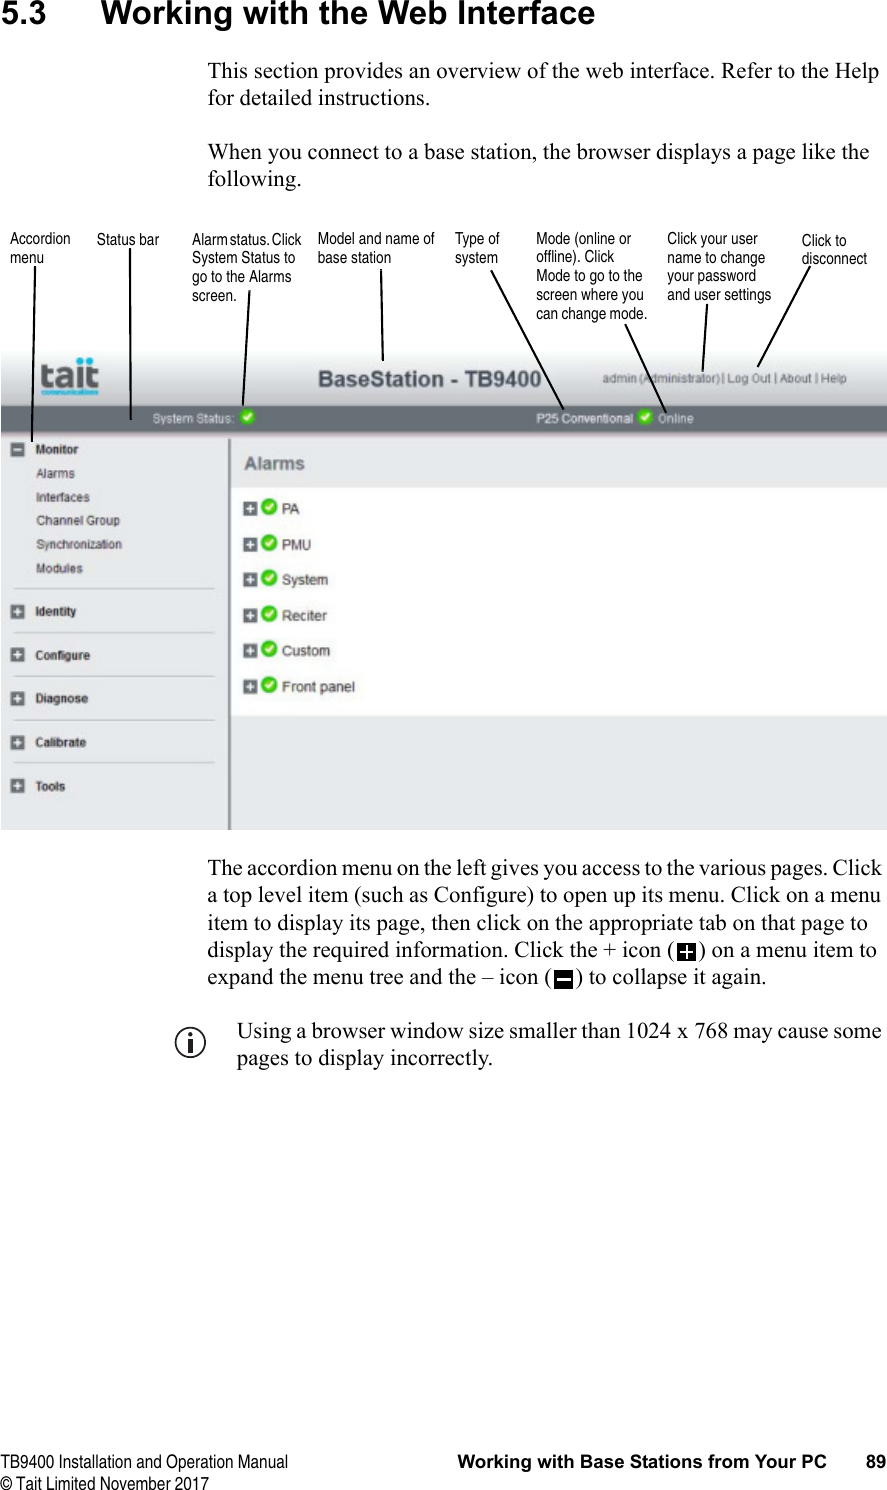  TB9400 Installation and Operation Manual Working with Base Stations from Your PC 89© Tait Limited November 20175.3 Working with the Web InterfaceThis section provides an overview of the web interface. Refer to the Help for detailed instructions.When you connect to a base station, the browser displays a page like the following.The accordion menu on the left gives you access to the various pages. Click a top level item (such as Configure) to open up its menu. Click on a menu item to display its page, then click on the appropriate tab on that page to display the required information. Click the + icon ( ) on a menu item to expand the menu tree and the – icon ( ) to collapse it again.Using a browser window size smaller than 1024 x 768 may cause some pages to display incorrectly.Accordion menuModel and name of base stationAlarm status. Click System Status to go to the Alarms screen.Mode (online or offline). Click Mode to go to the screen where you can change mode.Click to disconnectStatus bar Click your user name to change your password and user settingsType of system